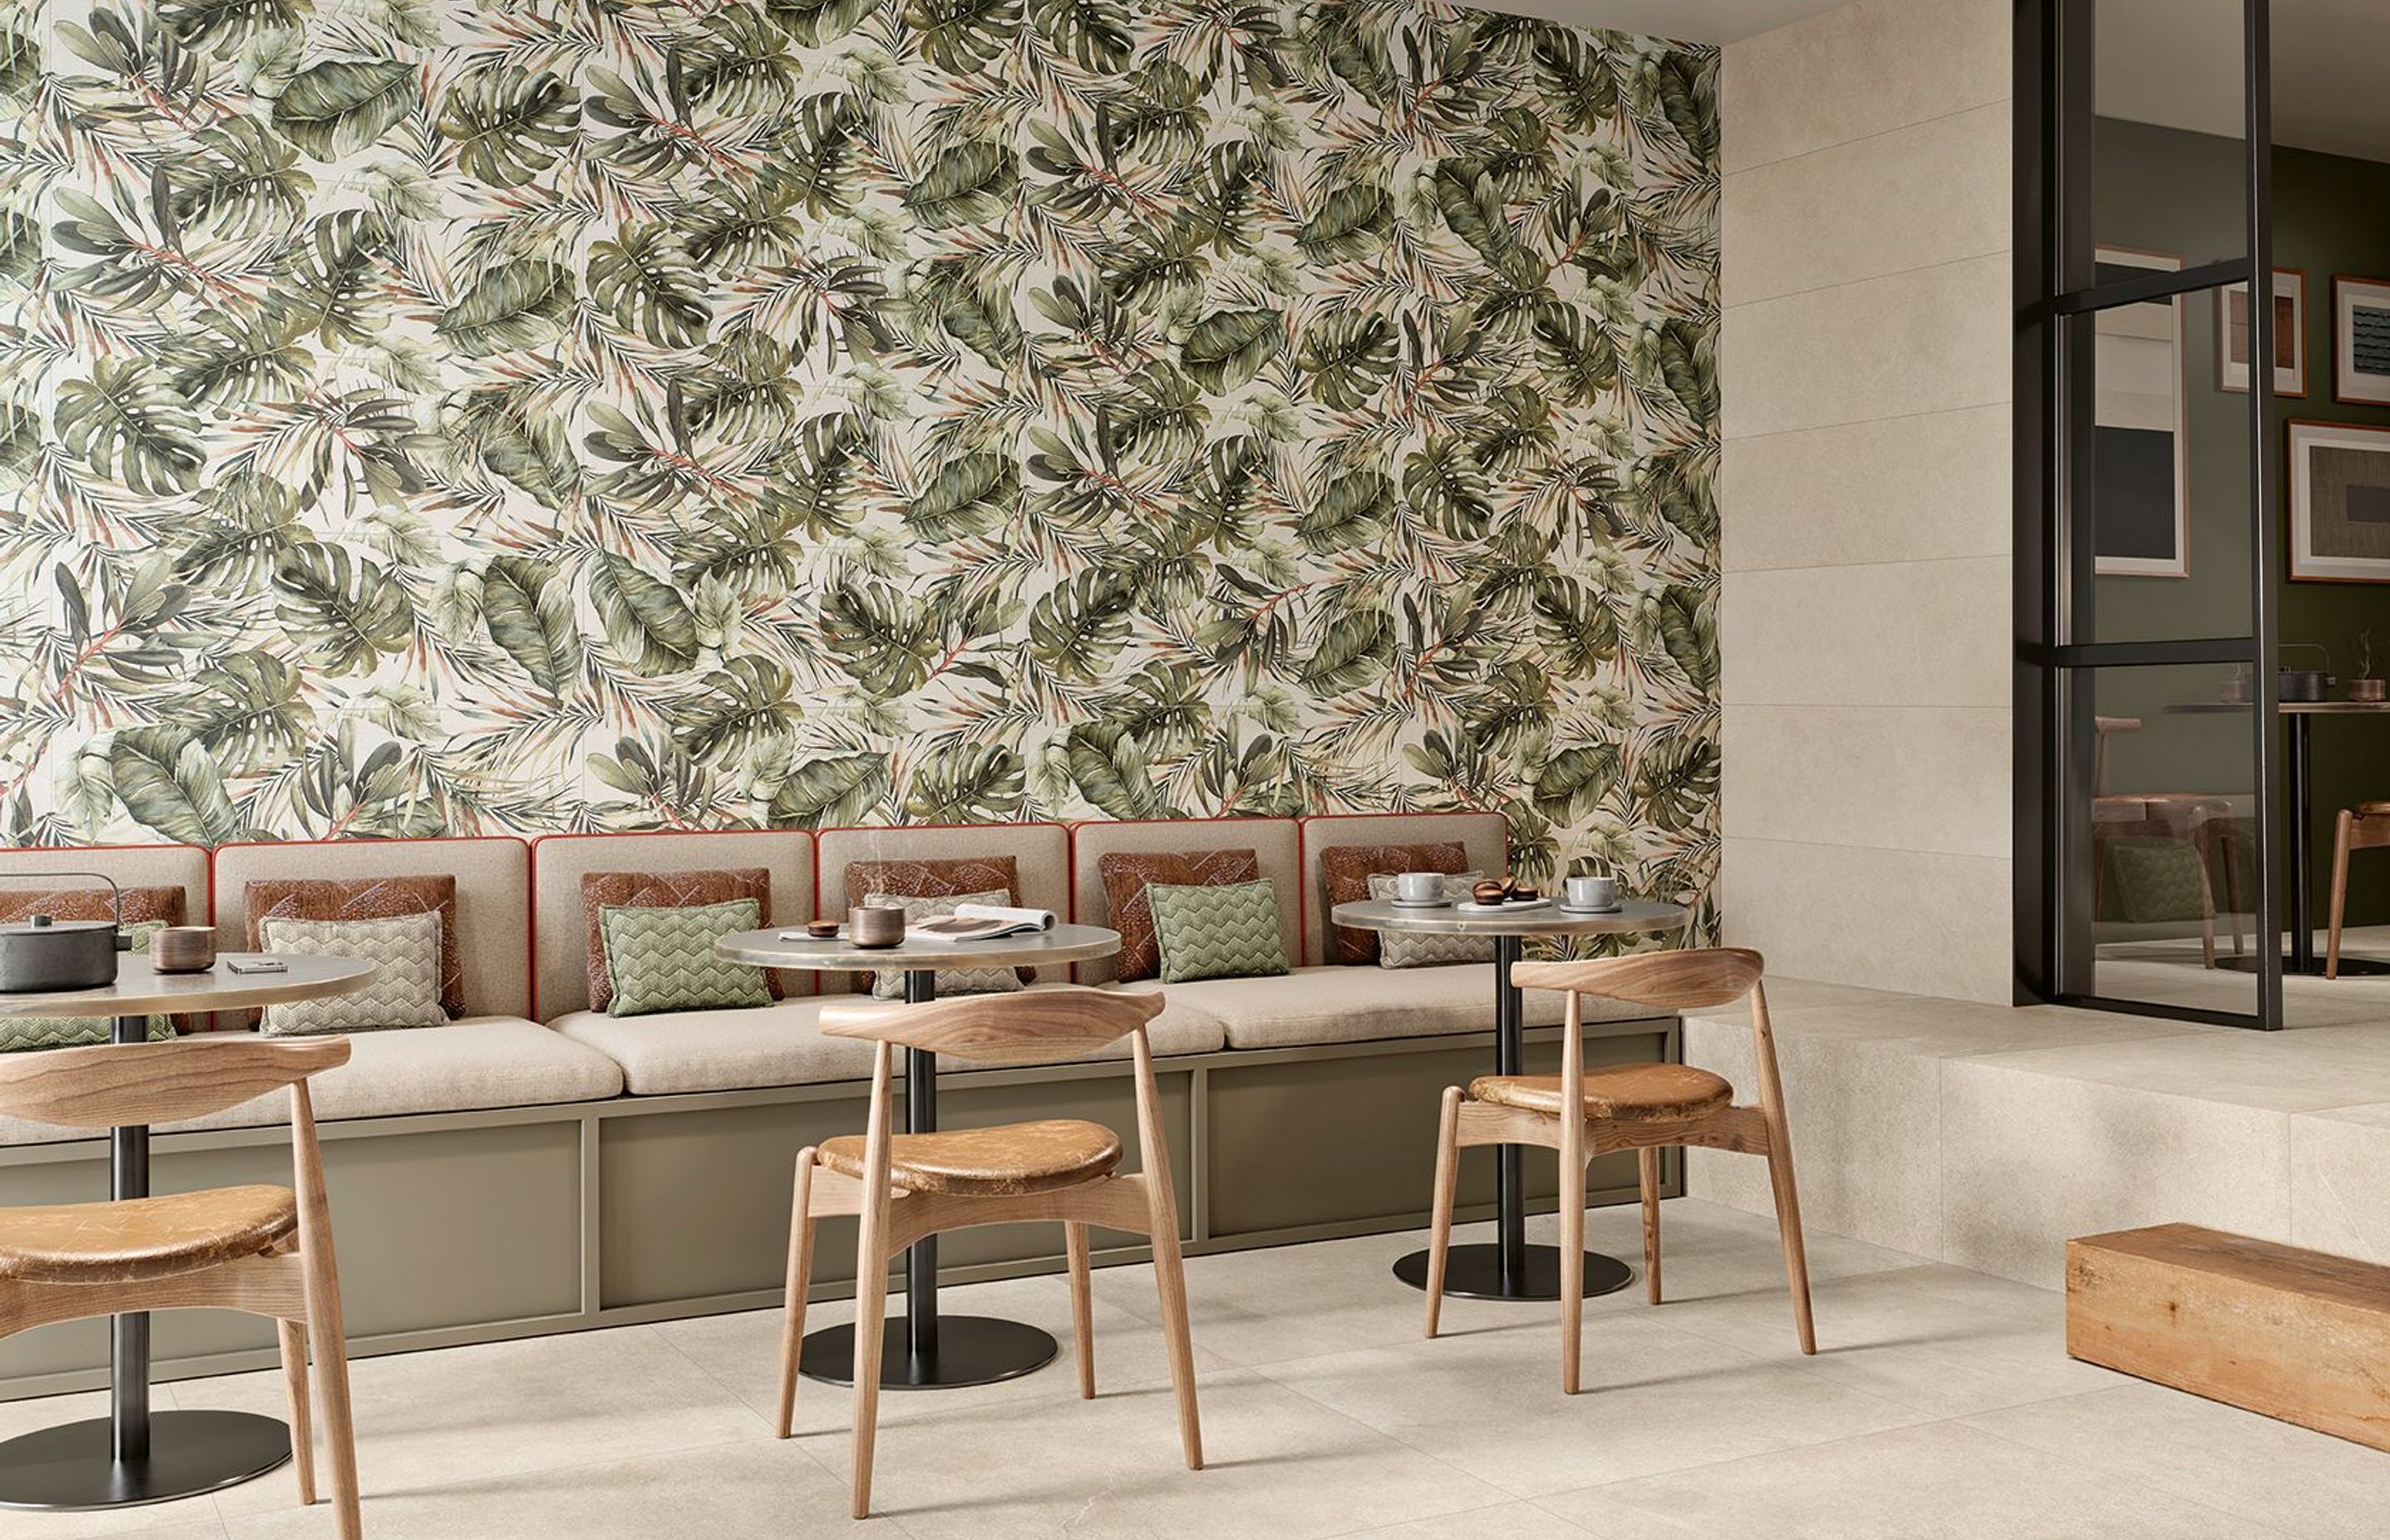 The 'wallpaper-look' tile is a major trend.